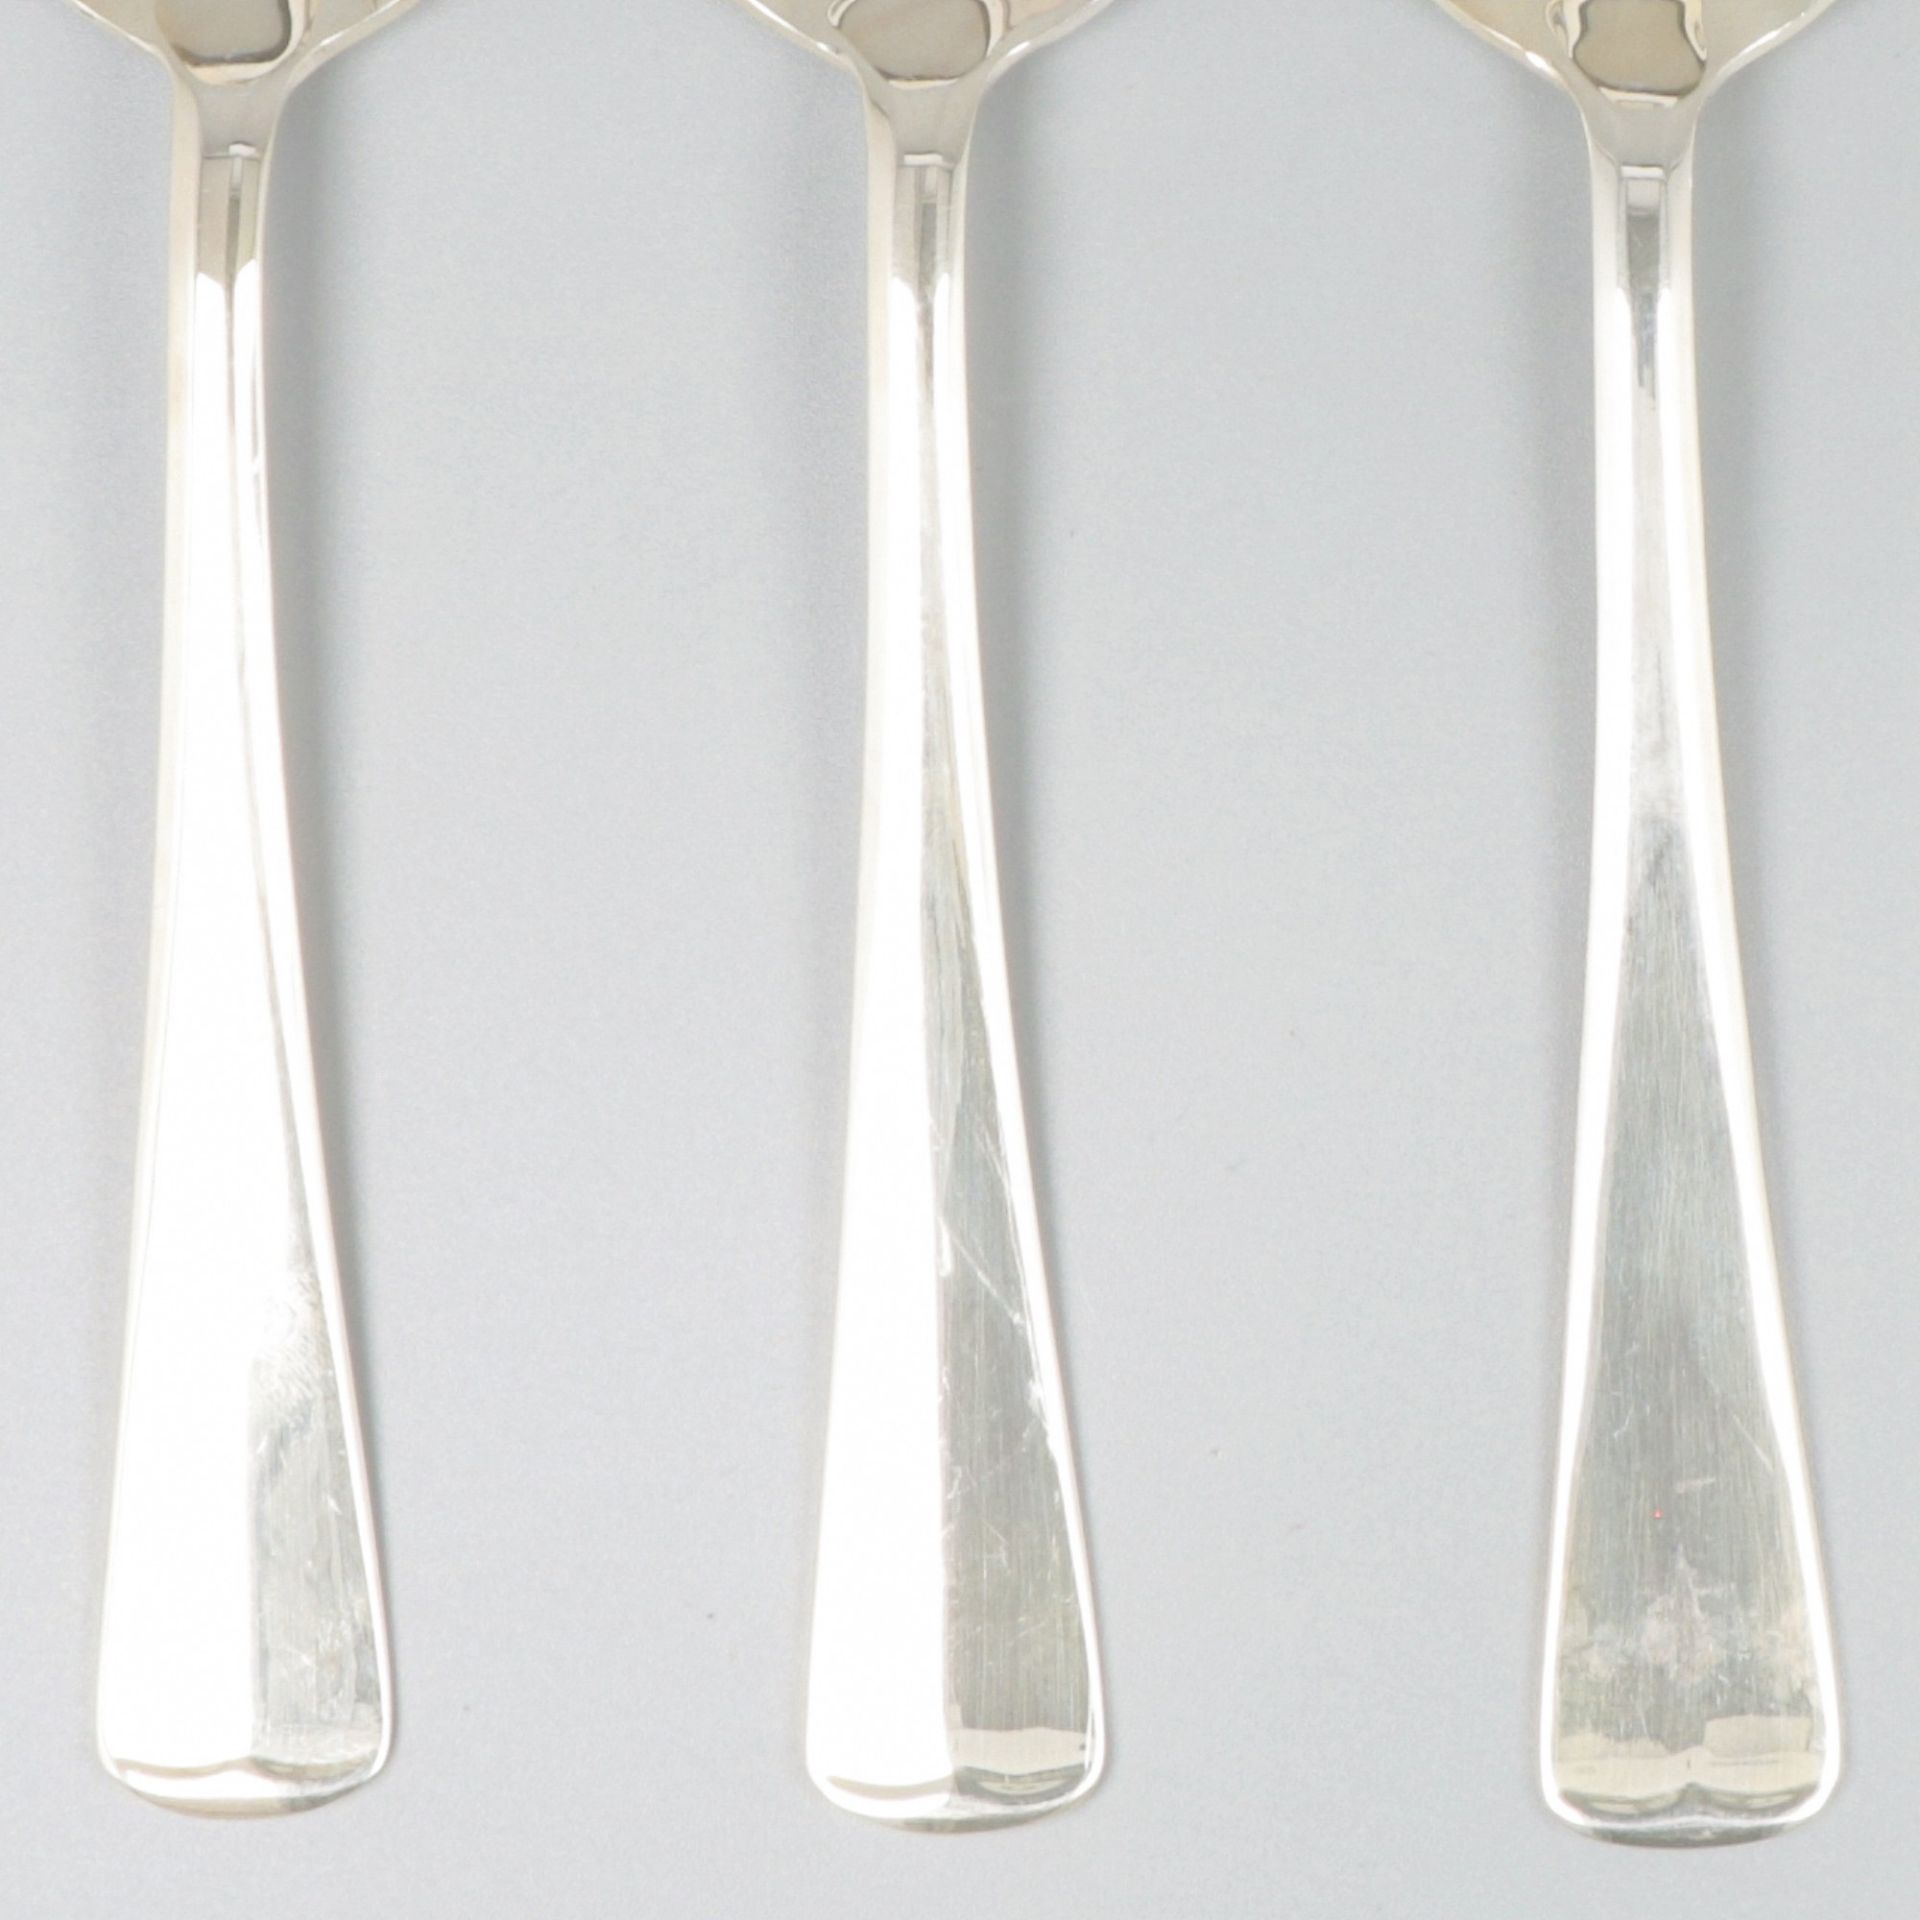 6 piece set of spoons "Haags Lofje" silver. - Image 4 of 5